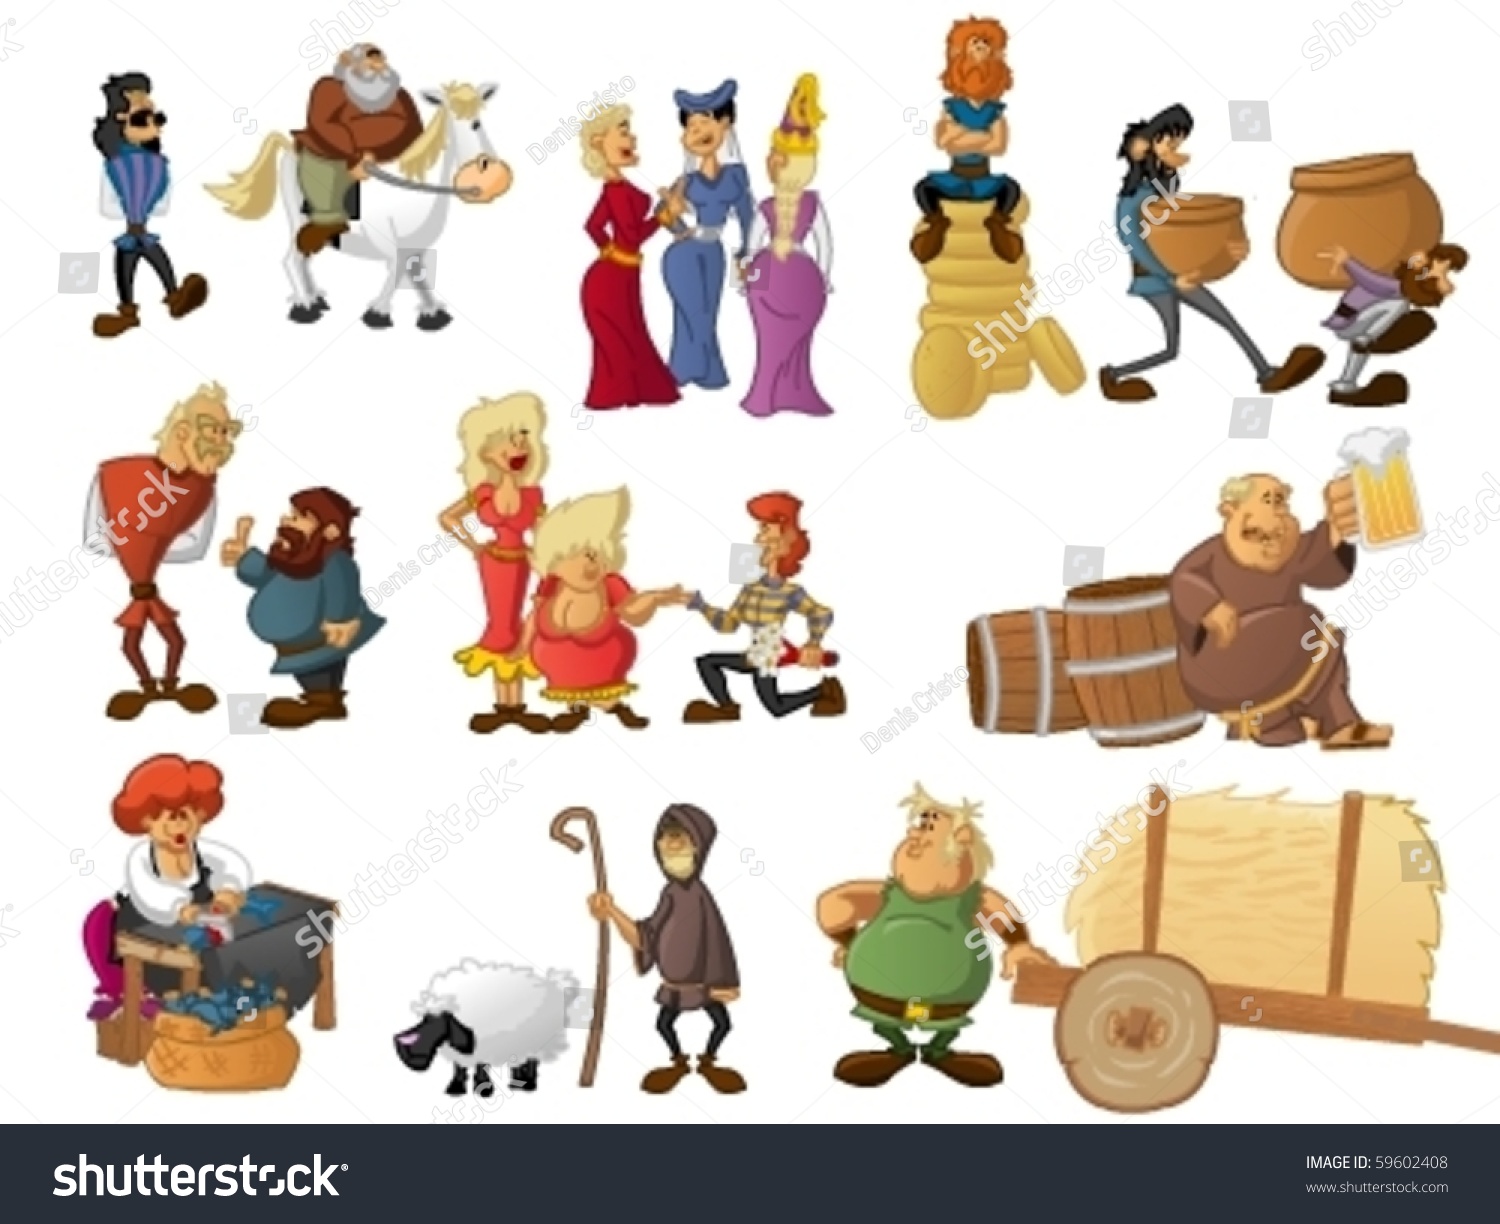 villagers clipart - photo #10